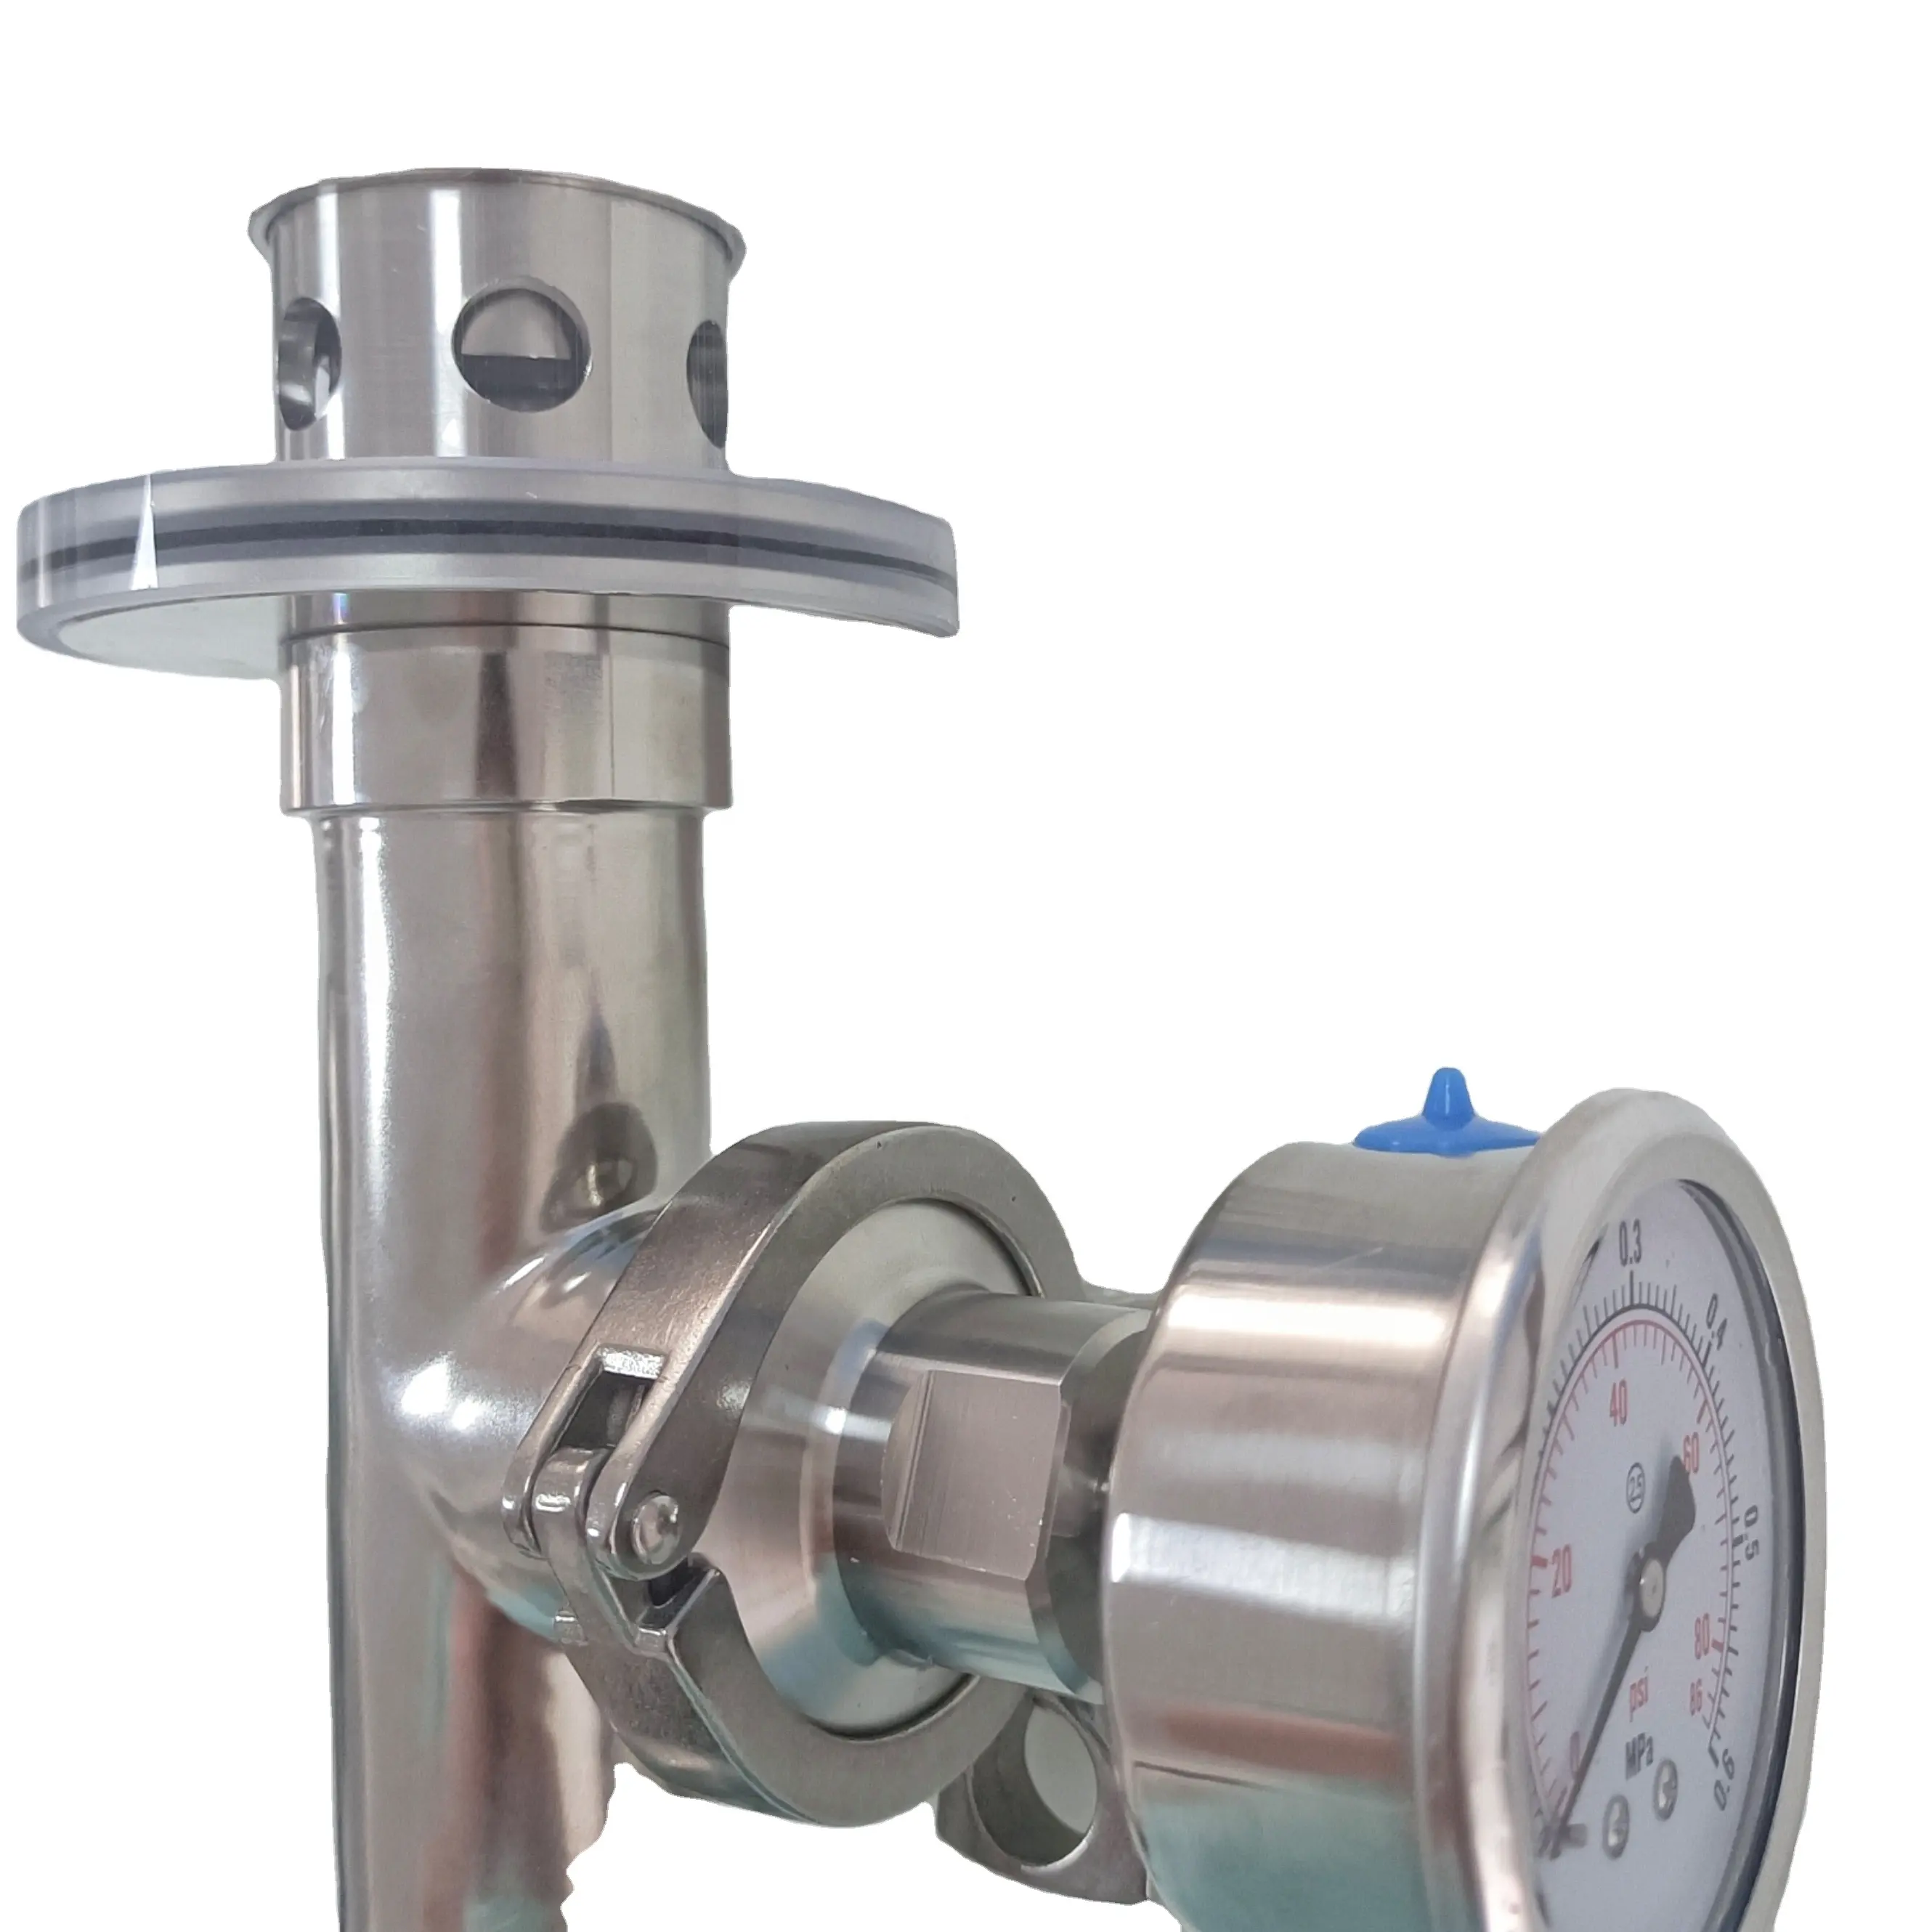 With Manometer Beer Brewing Fermenting Equipment tri clamp Spunding Valve sanitary TC Straight